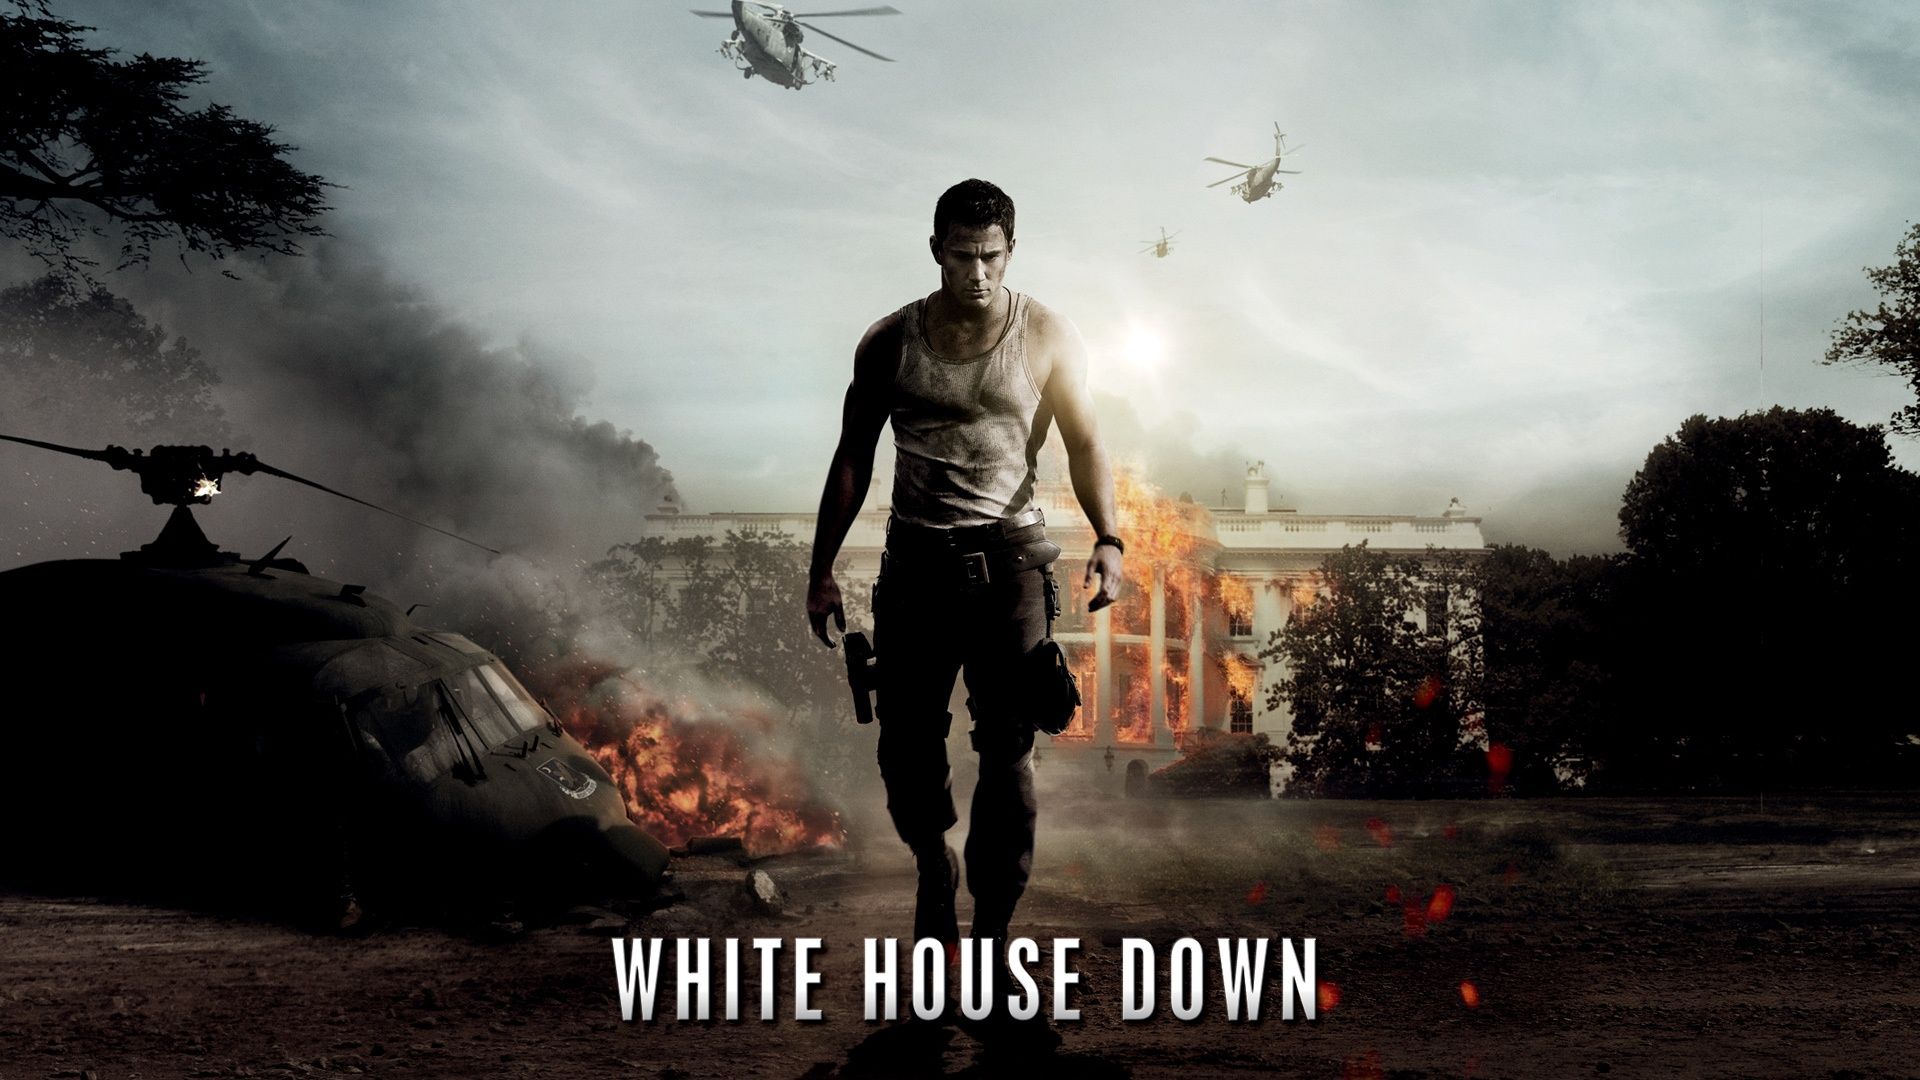 White House Down Wallpaper in jpg format for free download